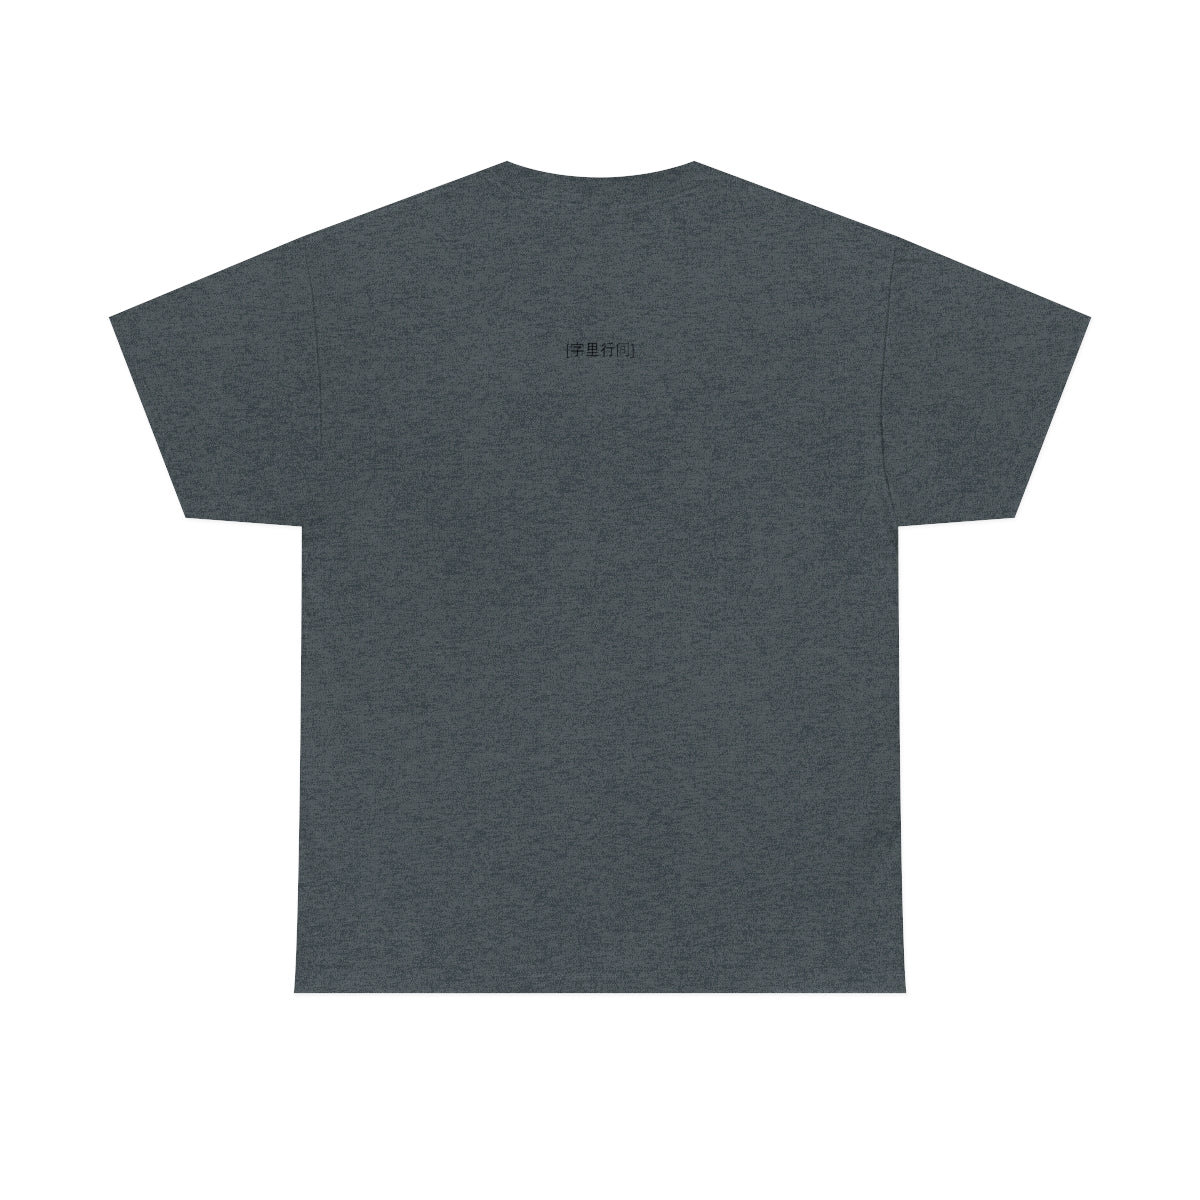 [N° d'inventaire] Between the Lines Heavy Cotton T-shirt